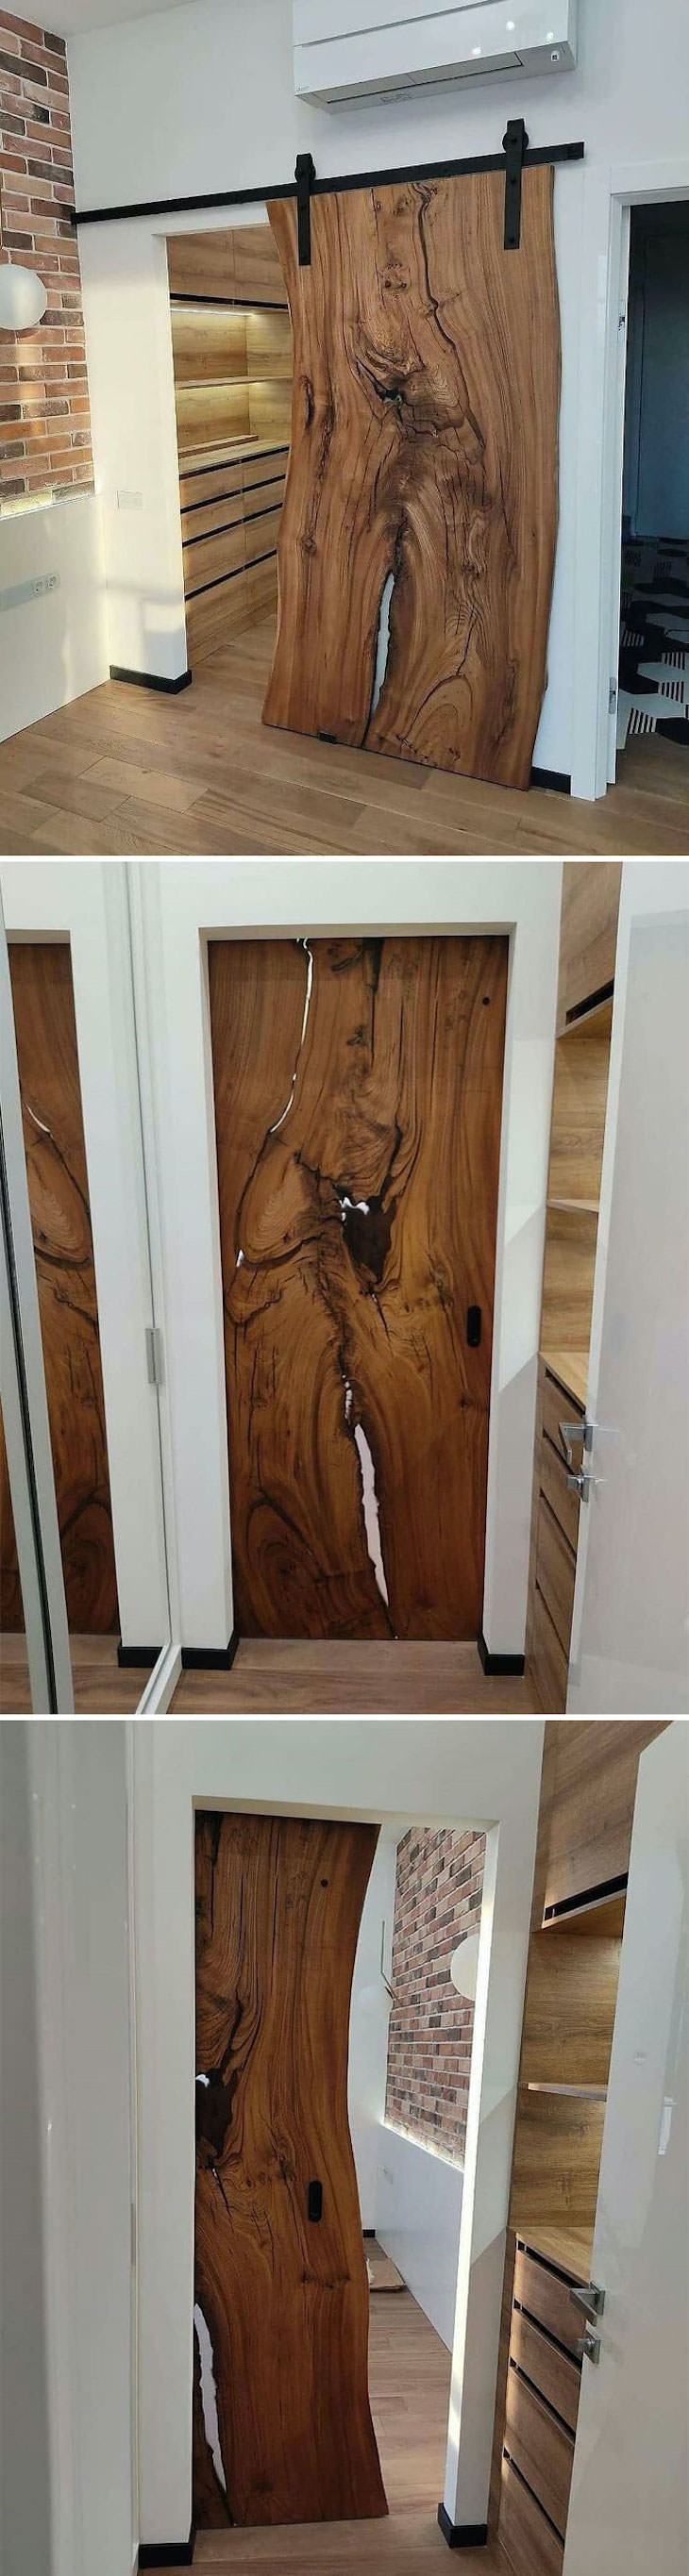 Creative and Cleverly Designed Items wooden door